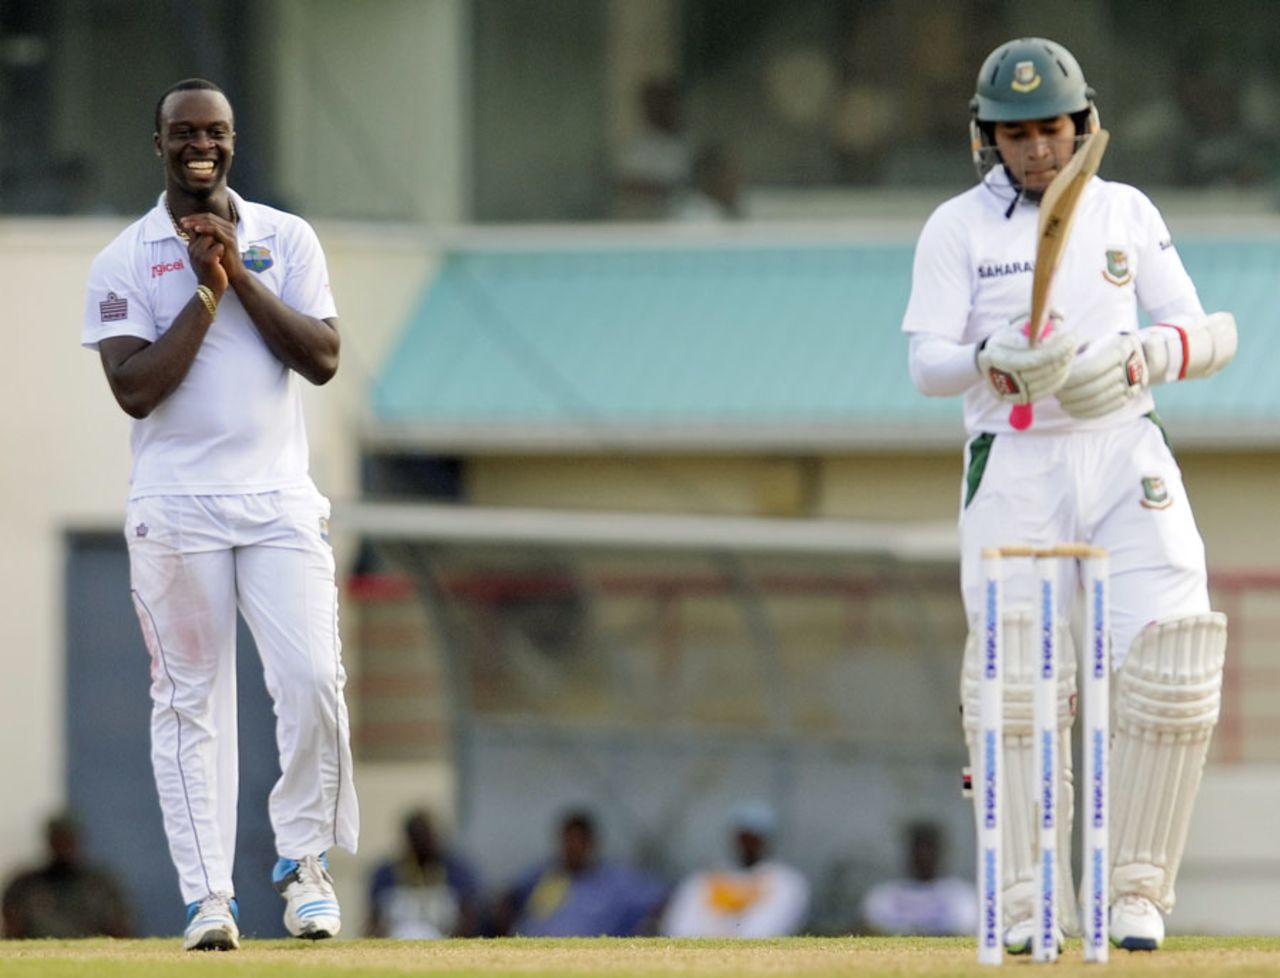 Kemar Roach smiles after bowling a delivery to Mushfiqur Rahim, West Indies v Bangladesh, 2nd Test, St. Lucia, 2nd day, September 14, 2014